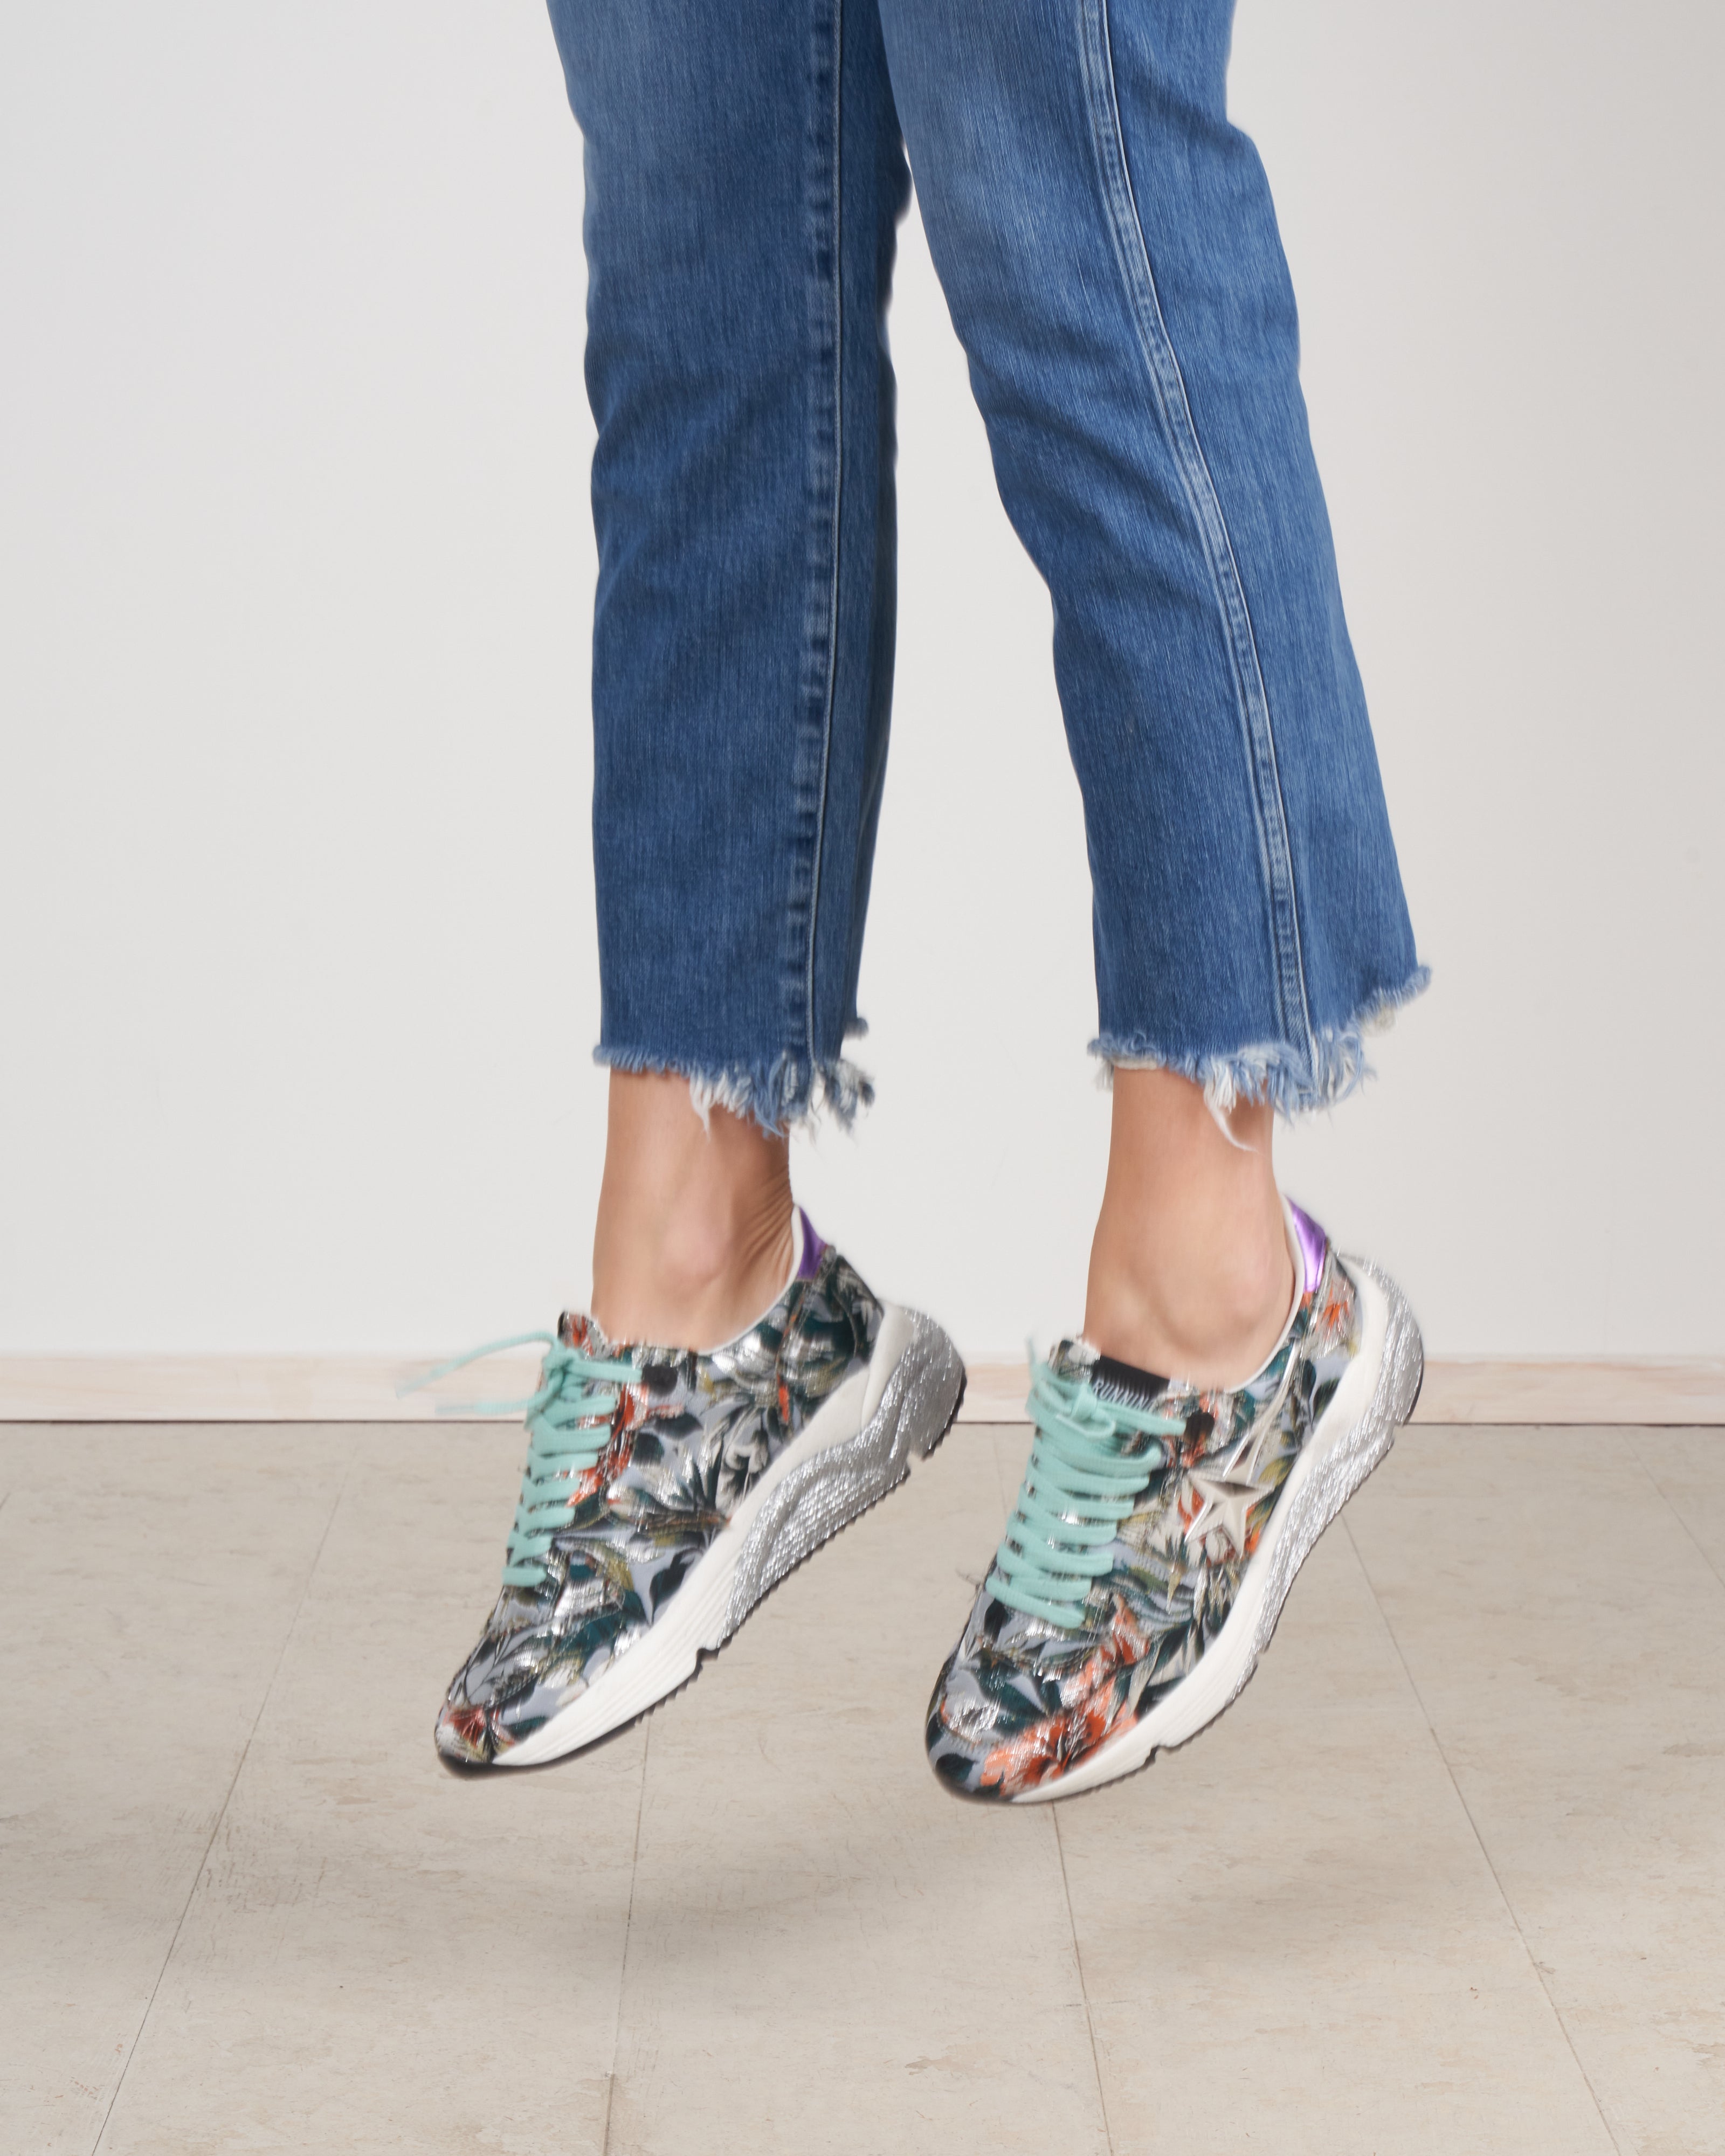 Golden Goose Running Sole Floral Jacquard Upper And Spur 3D Star  Multicolor/Silver/Grape 80912